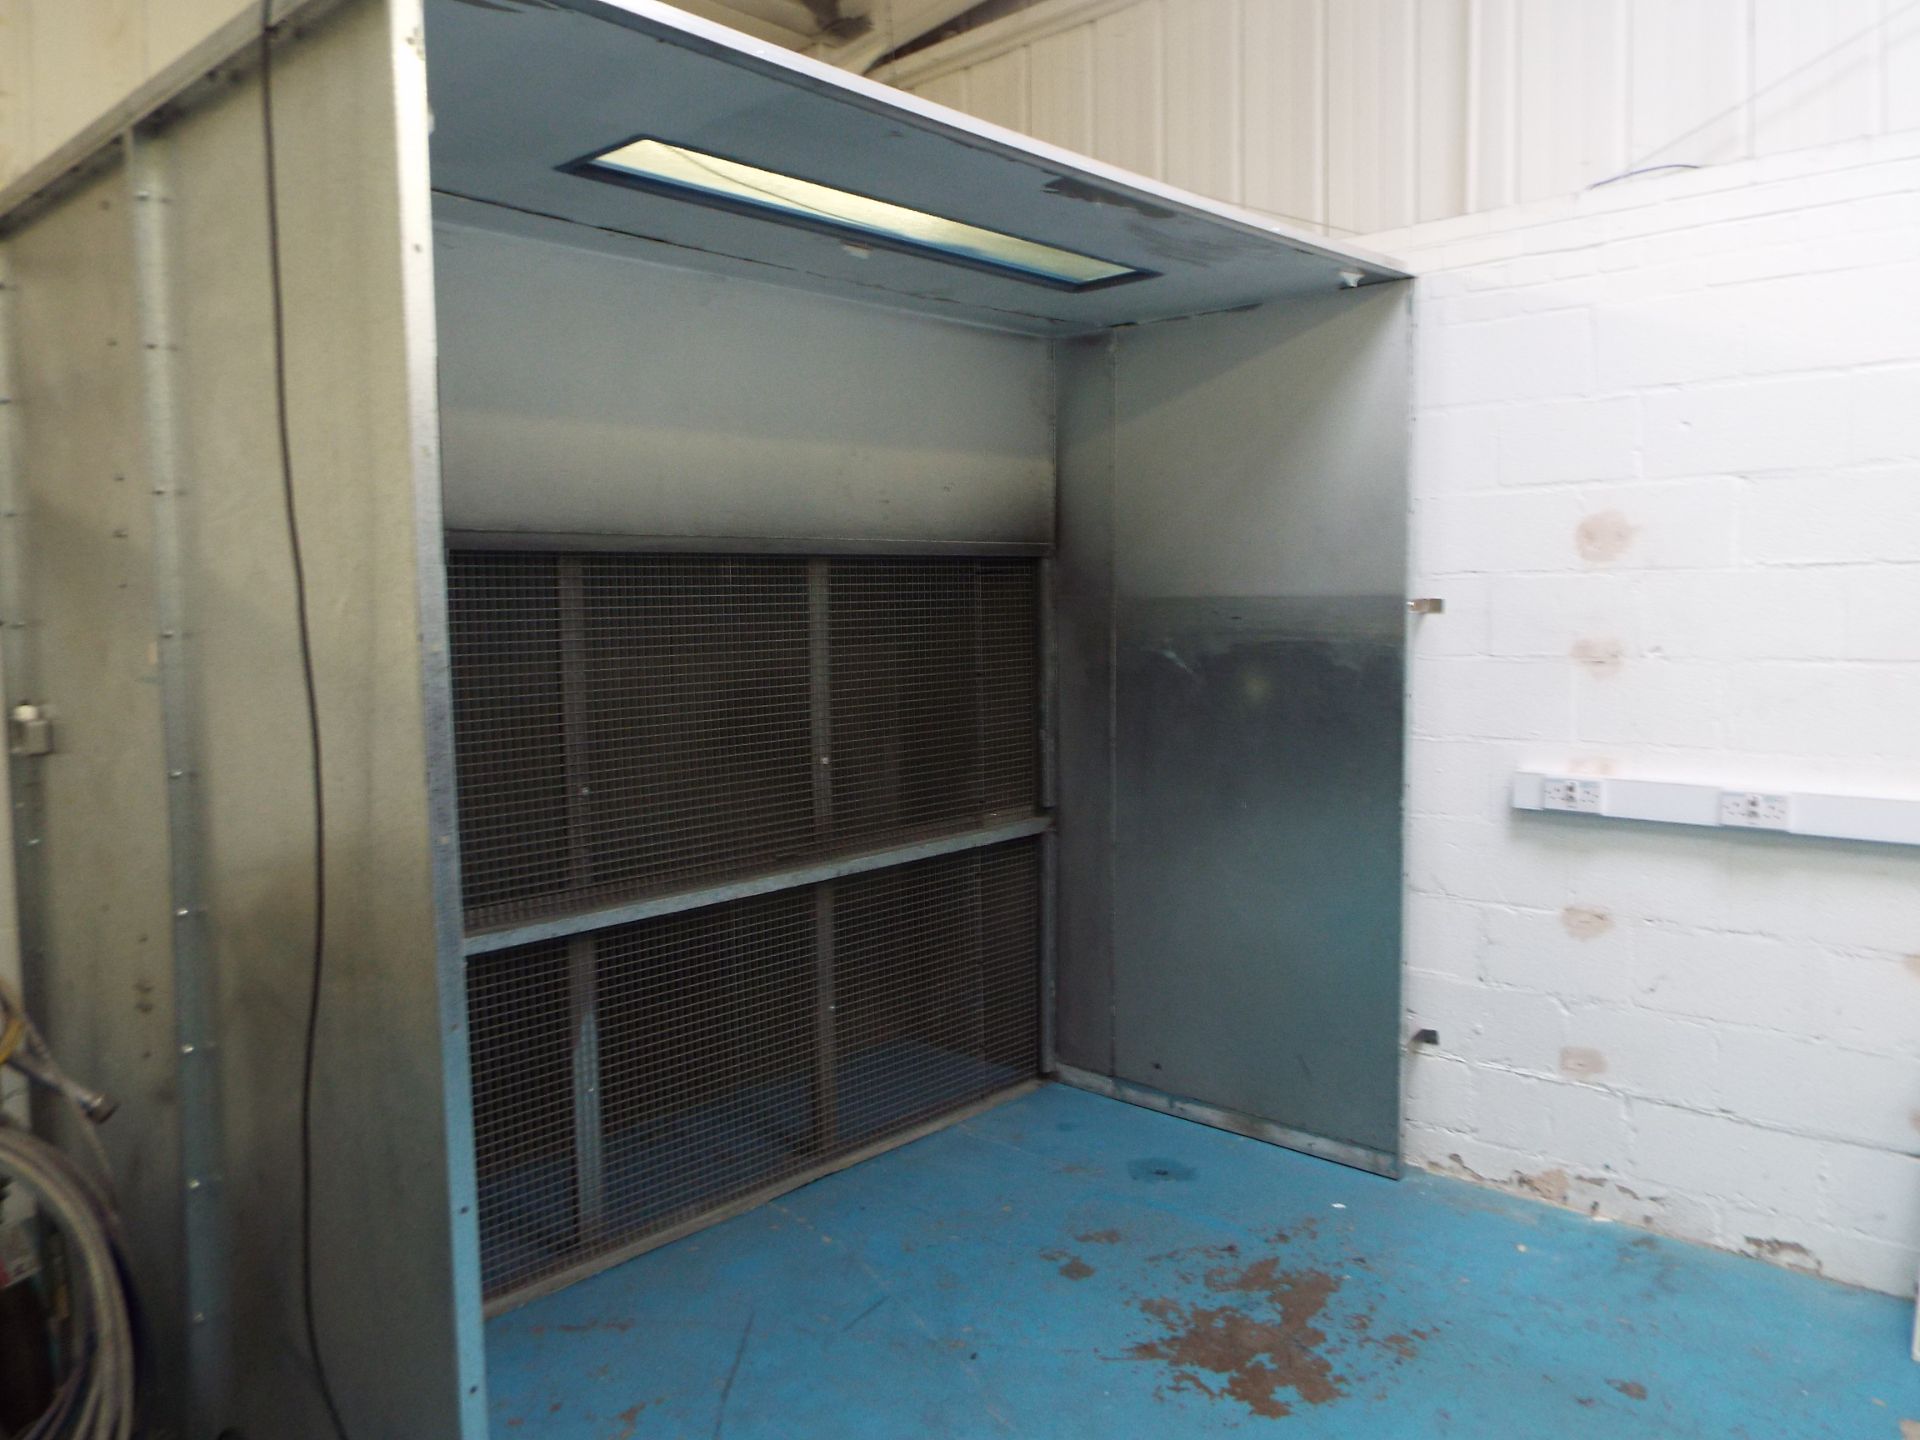 Dry Filter Spray Booth - Image 2 of 5